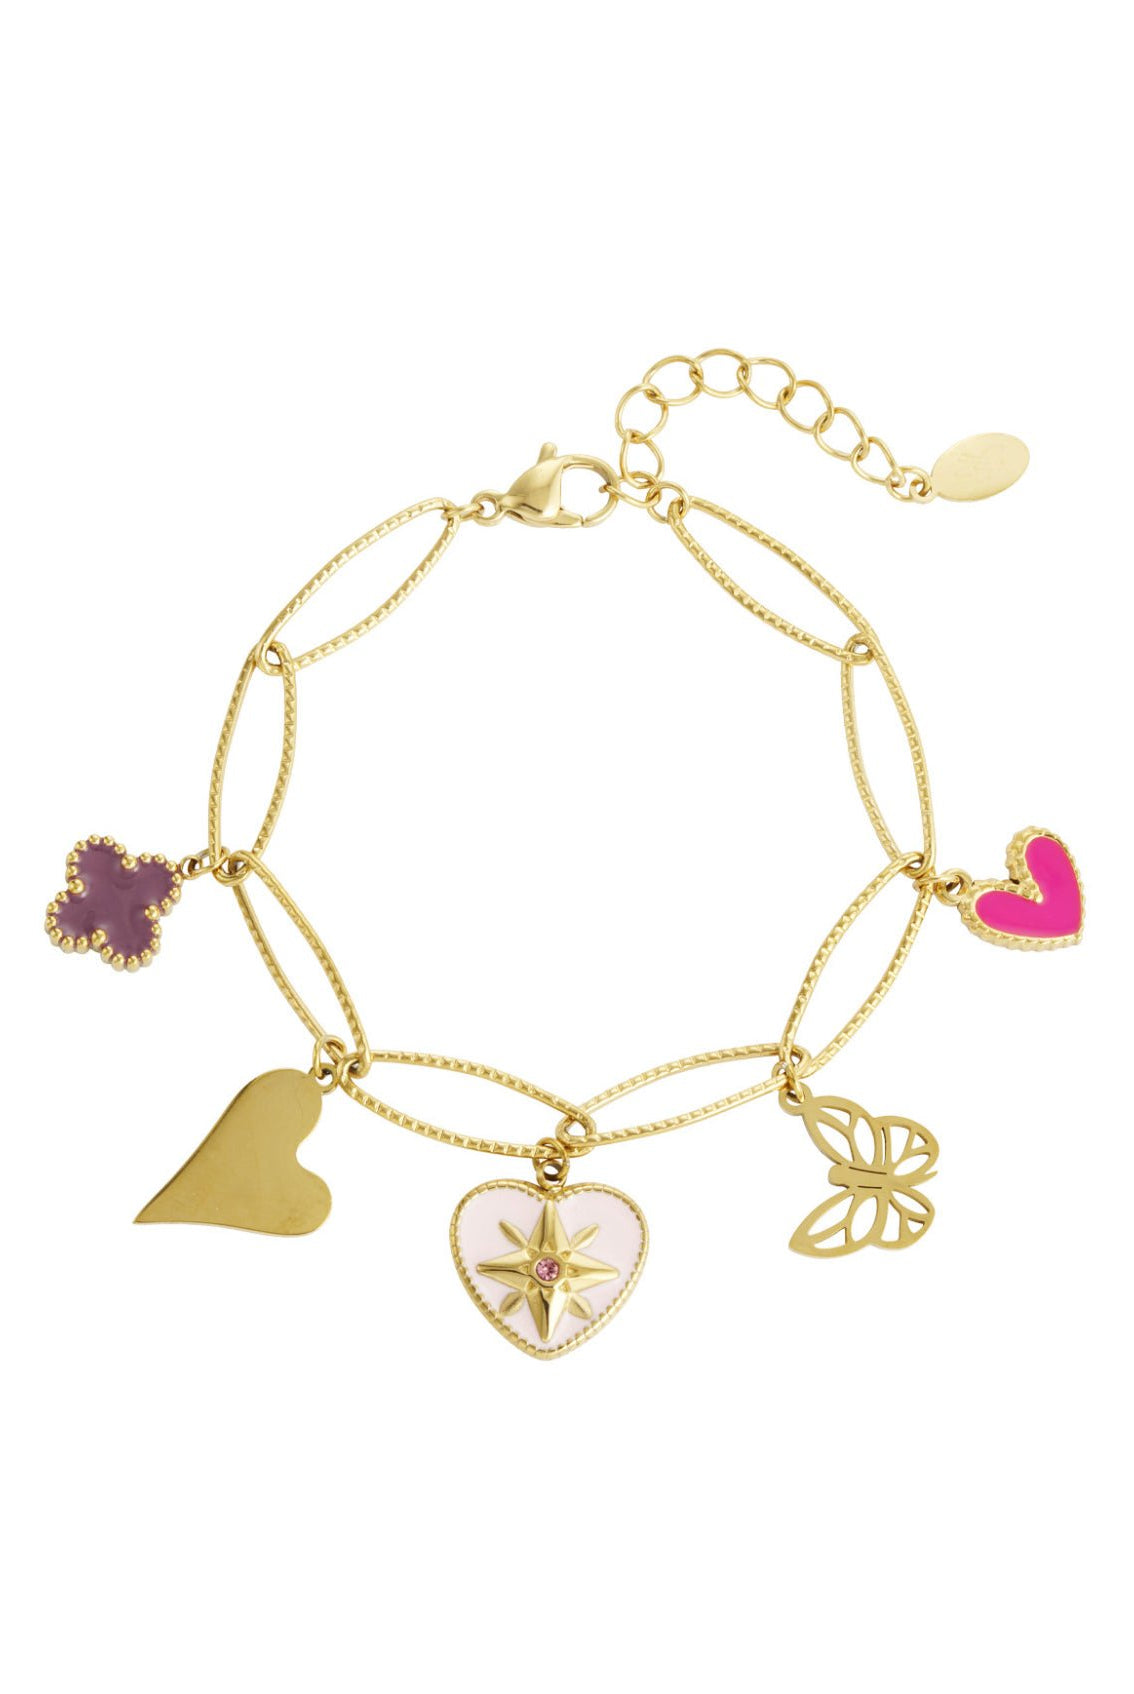 ♥︎LOVELY BUTTERFLY ARMBAND - My Favourites